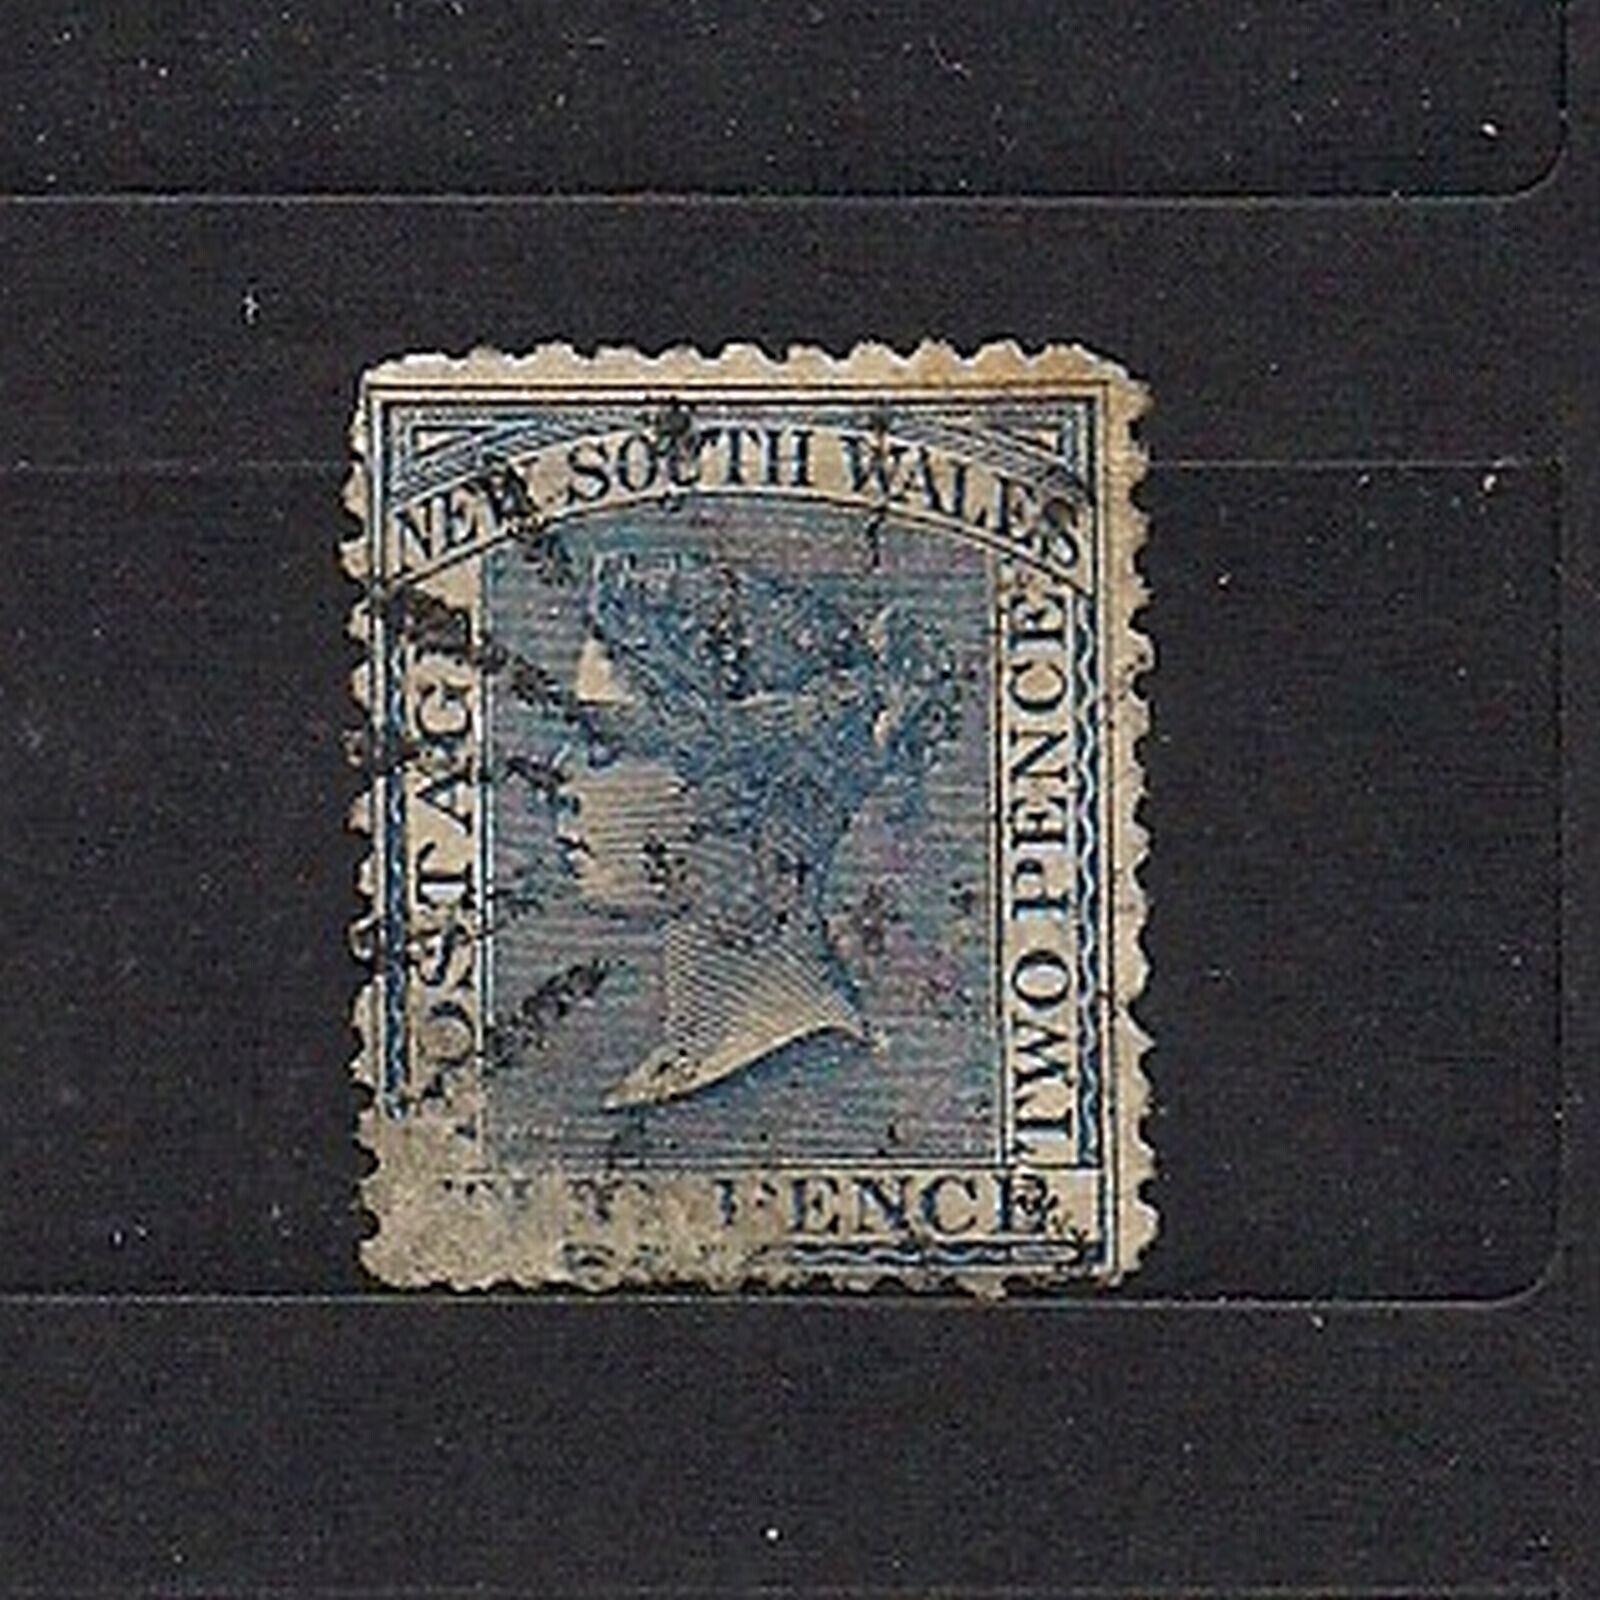 Australia / New South Wales:  Old 2 Pence Queen Victoria Stamp / Fancy Cancel